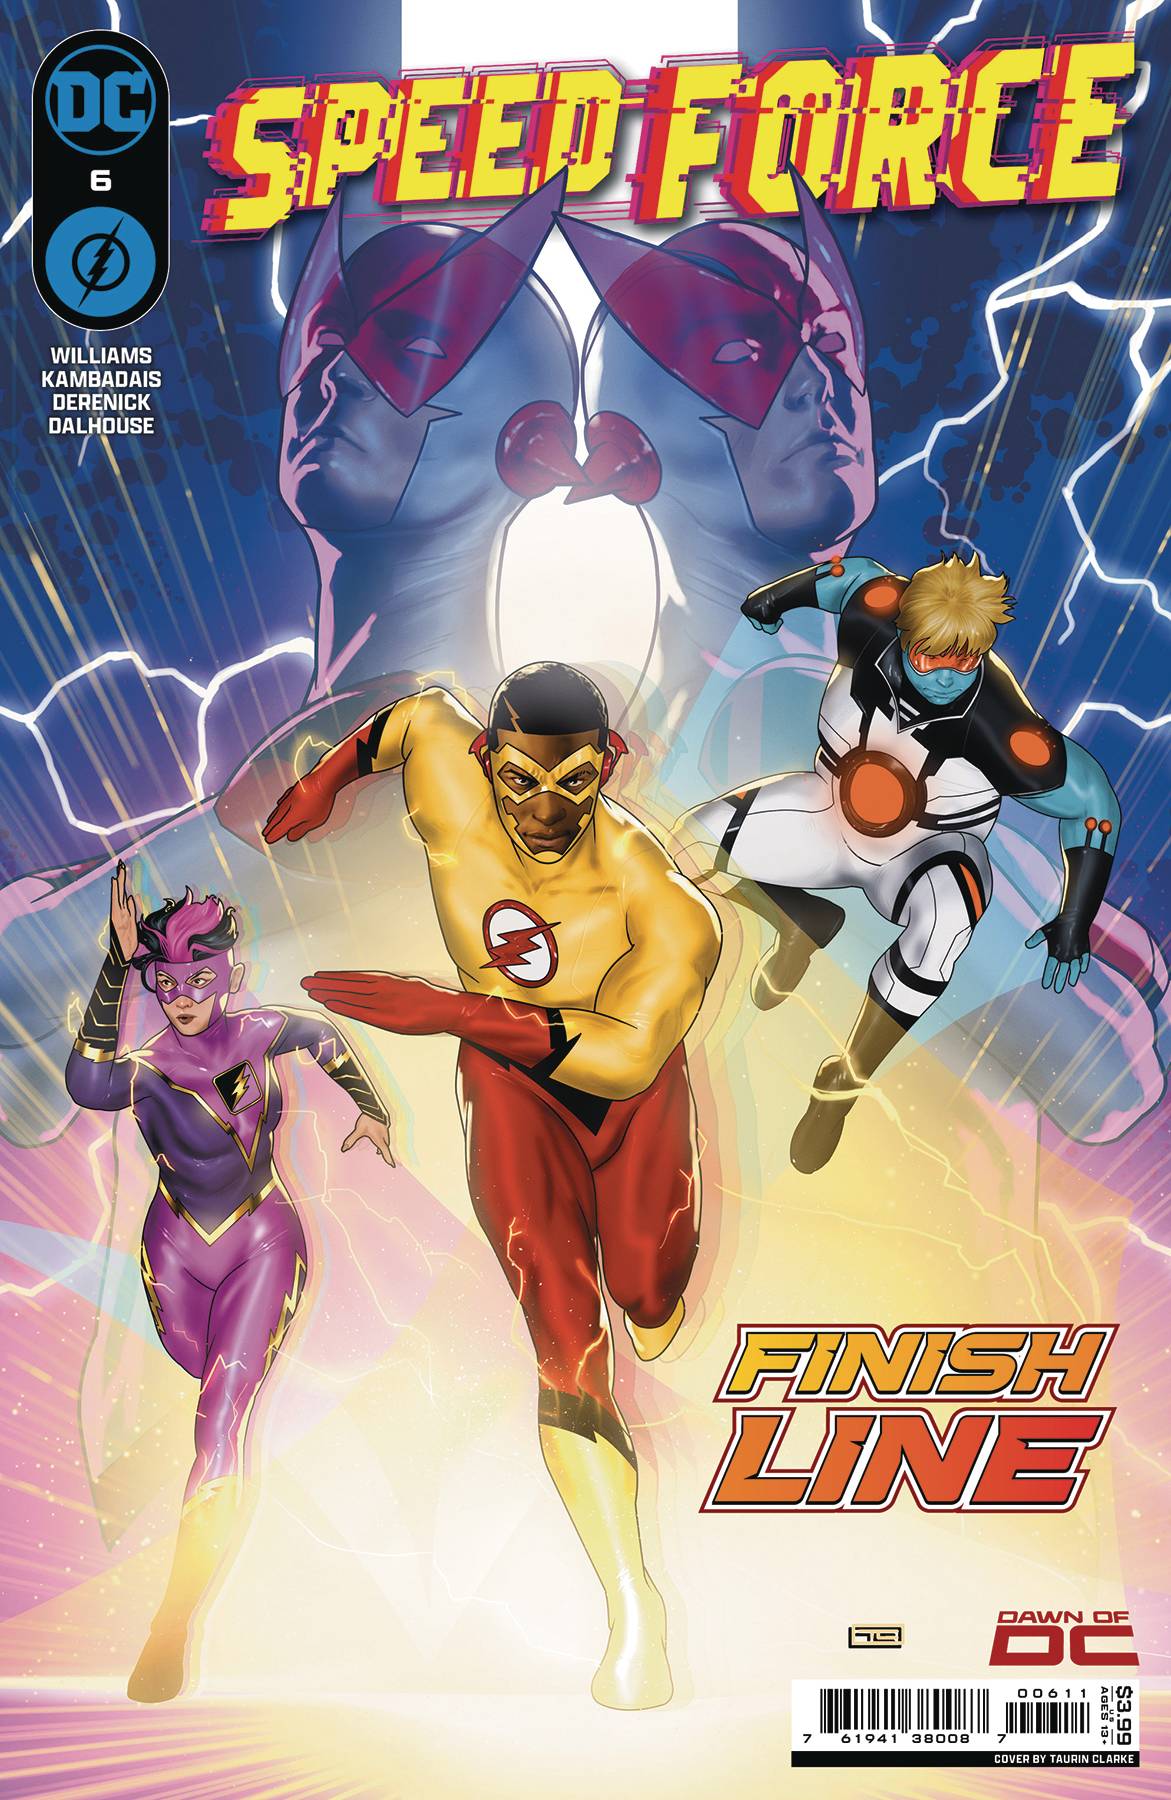 SPEED FORCE #6 (OF 6)